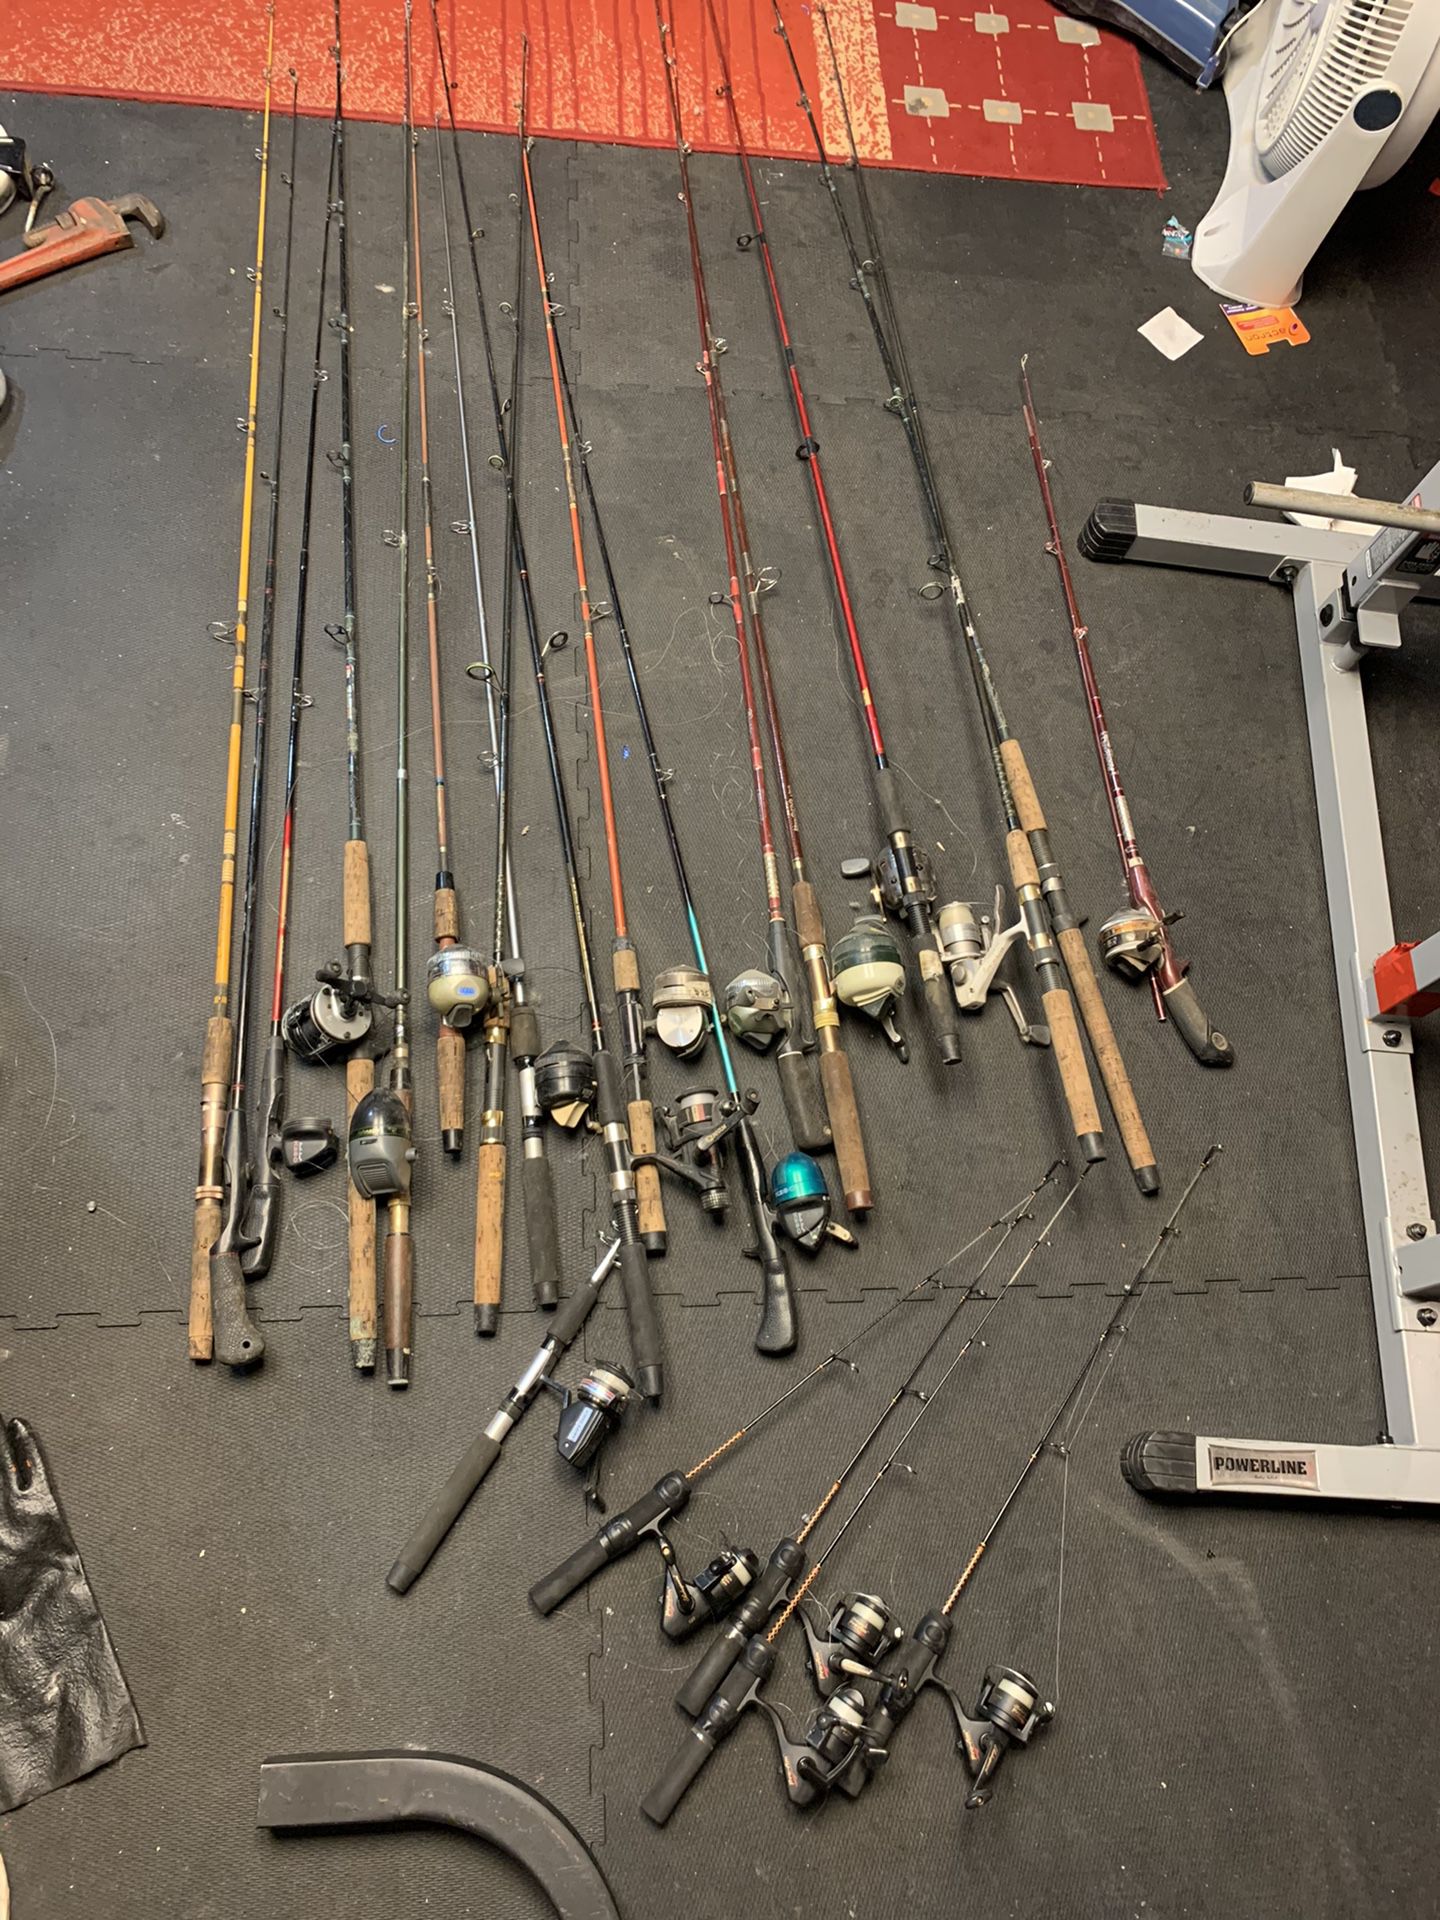 Lot of fishing rods, fishing lures and accessories